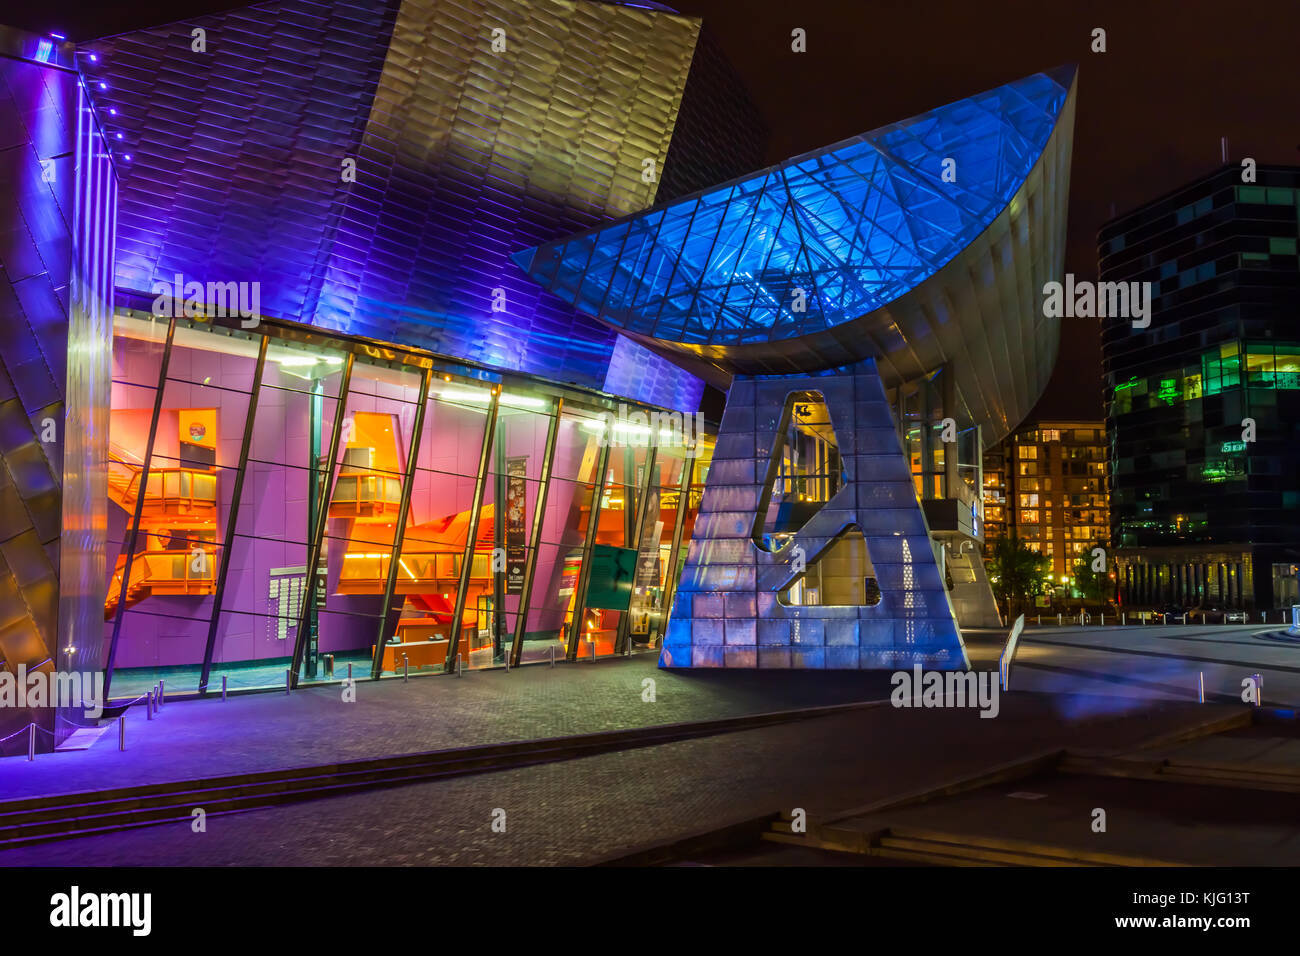 Late Evening at the Main Entrance to the Lowry Theatres and Art Galleries at Salford Quays. Stock Photo